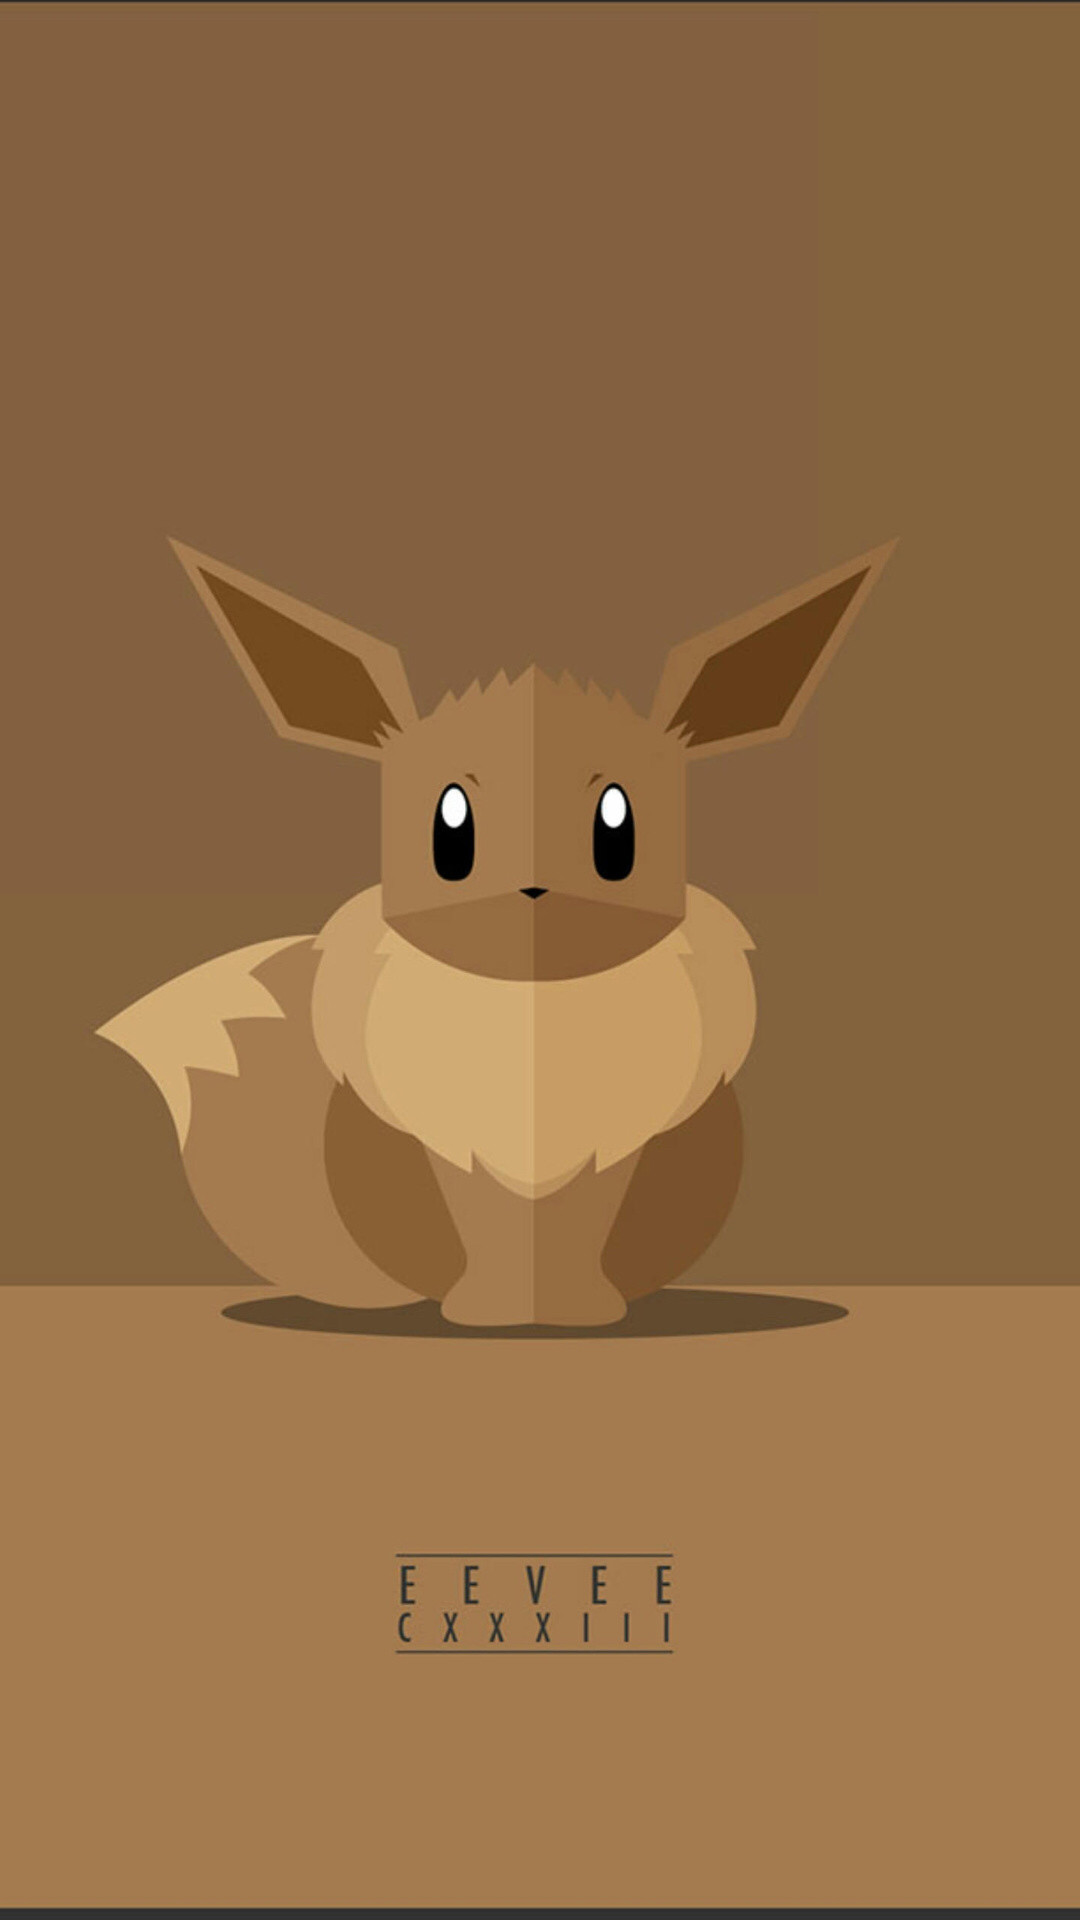 1080x1920 Deviant Art user Weaponix has created a series of minimalistic posters  depicting the different evolved forms of Eevee. For the uninitiated,.